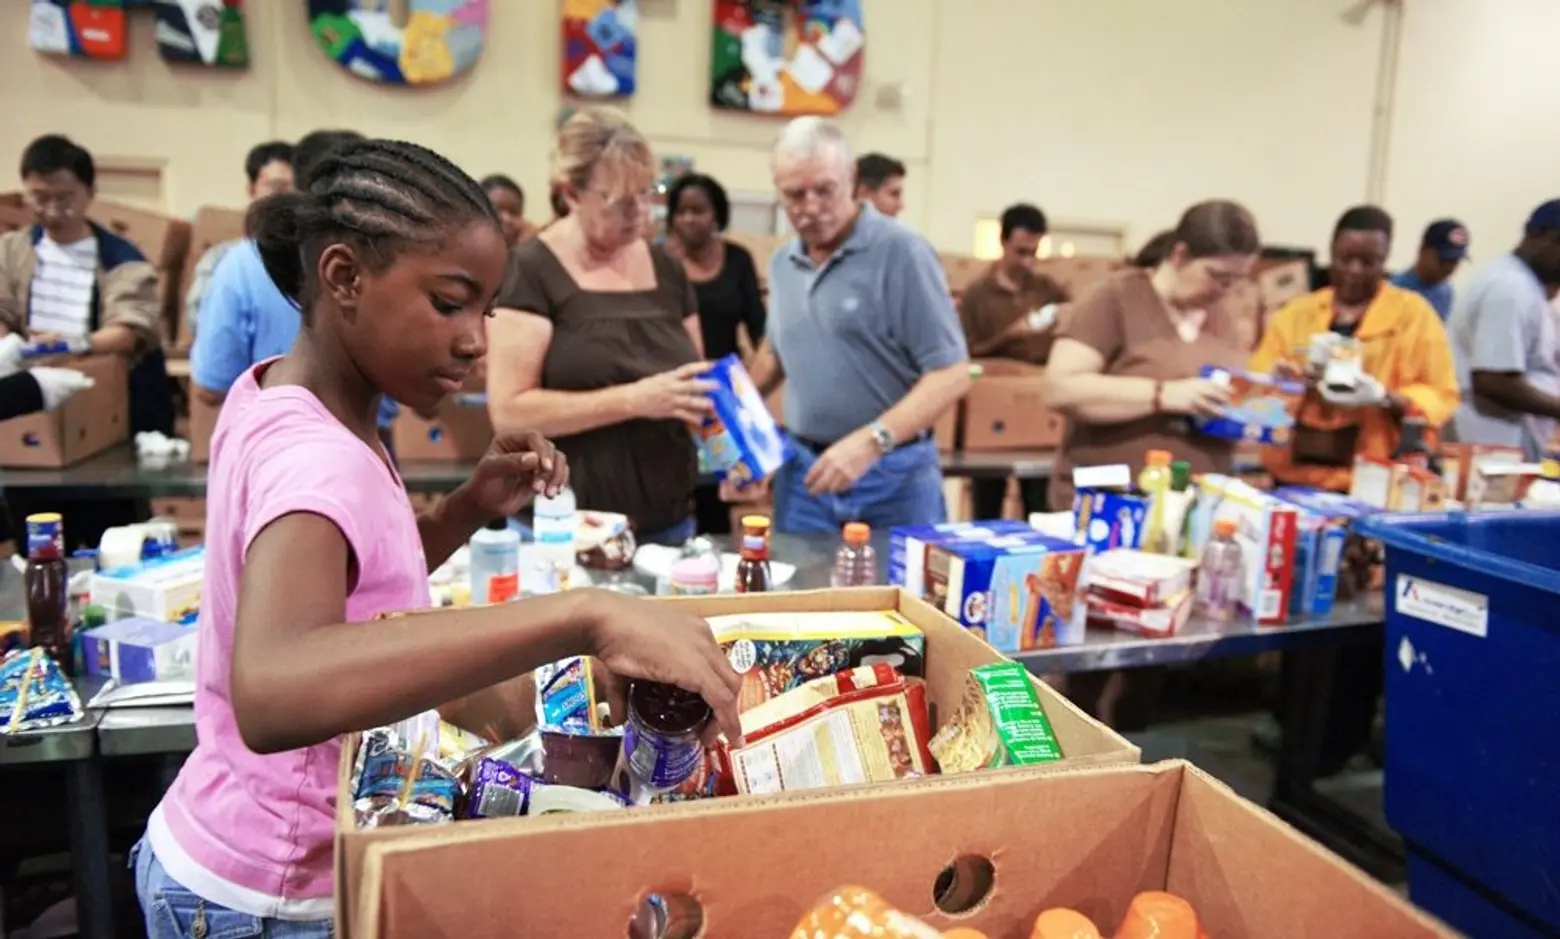 Where to volunteer in NYC: Food banks, shelters, soup kitchens, and more